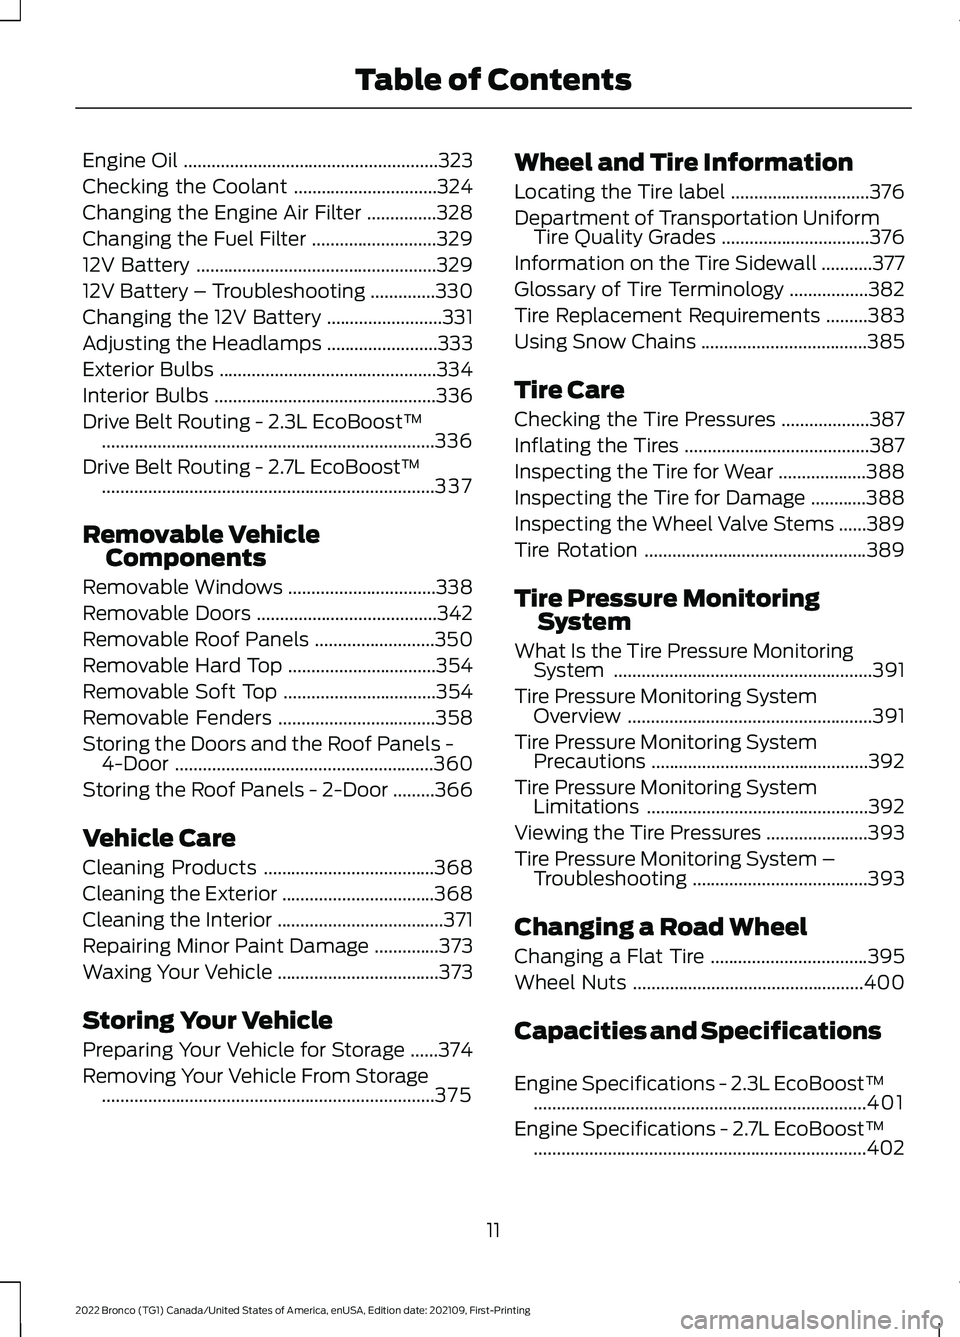 FORD BRONCO 2022  Owners Manual Engine Oil.......................................................323
Checking the Coolant...............................324
Changing the Engine Air Filter...............328
Changing the Fuel Filter...